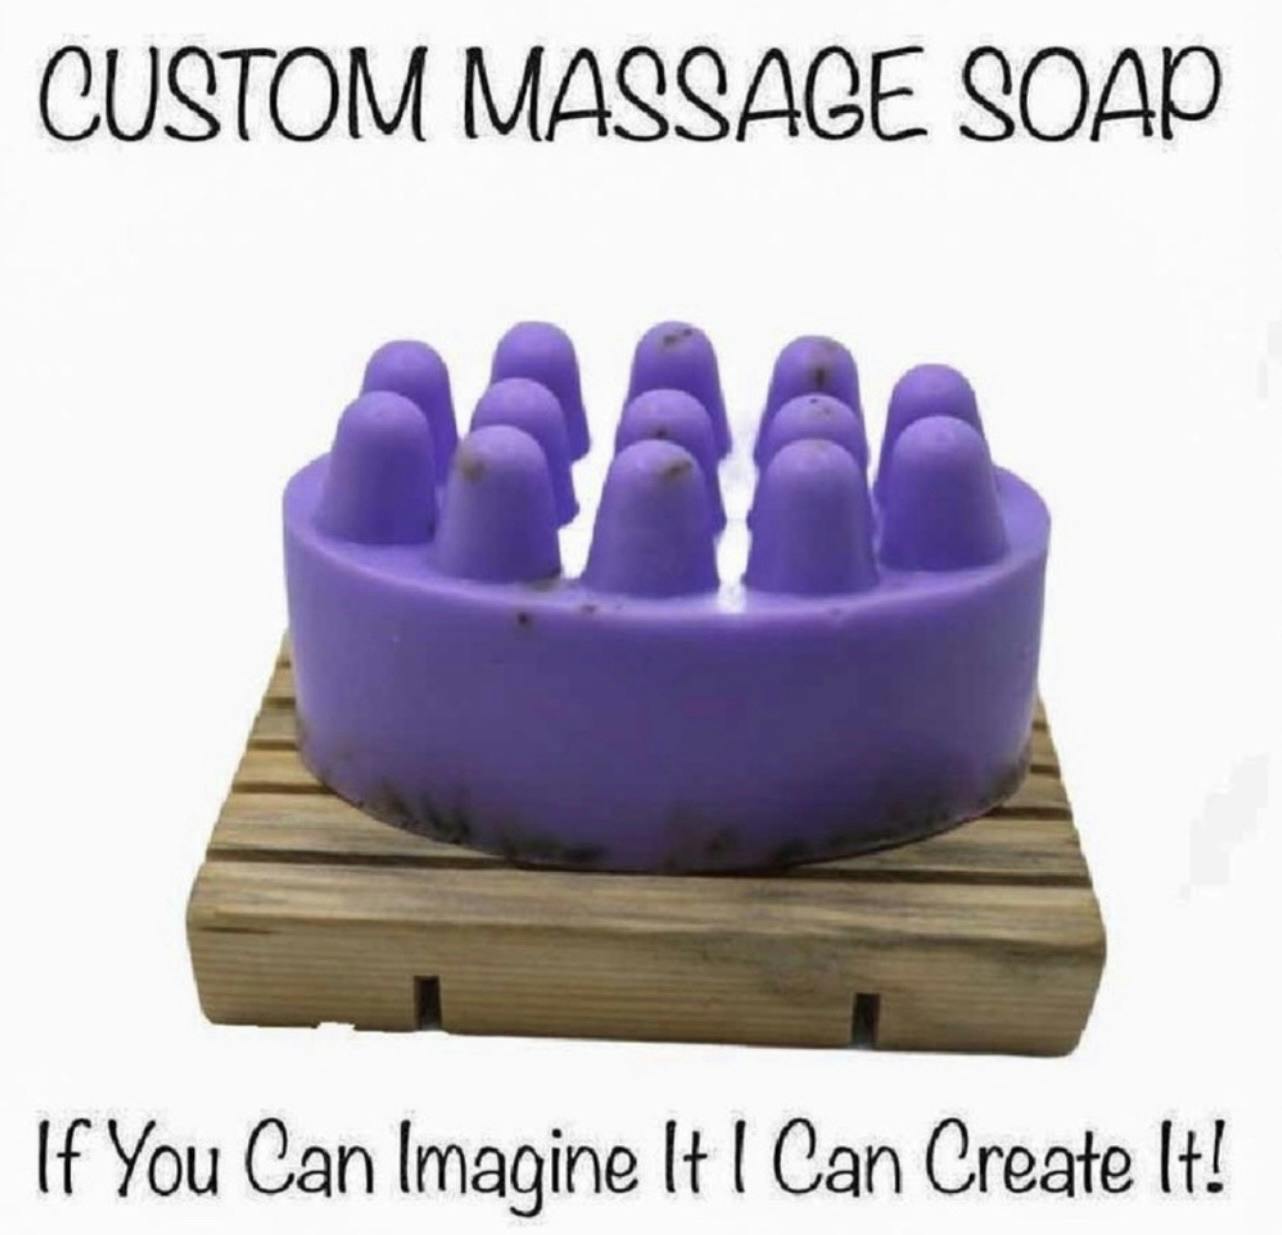 CUSTOMIZE YOUR OWN MASSAGE SOAP